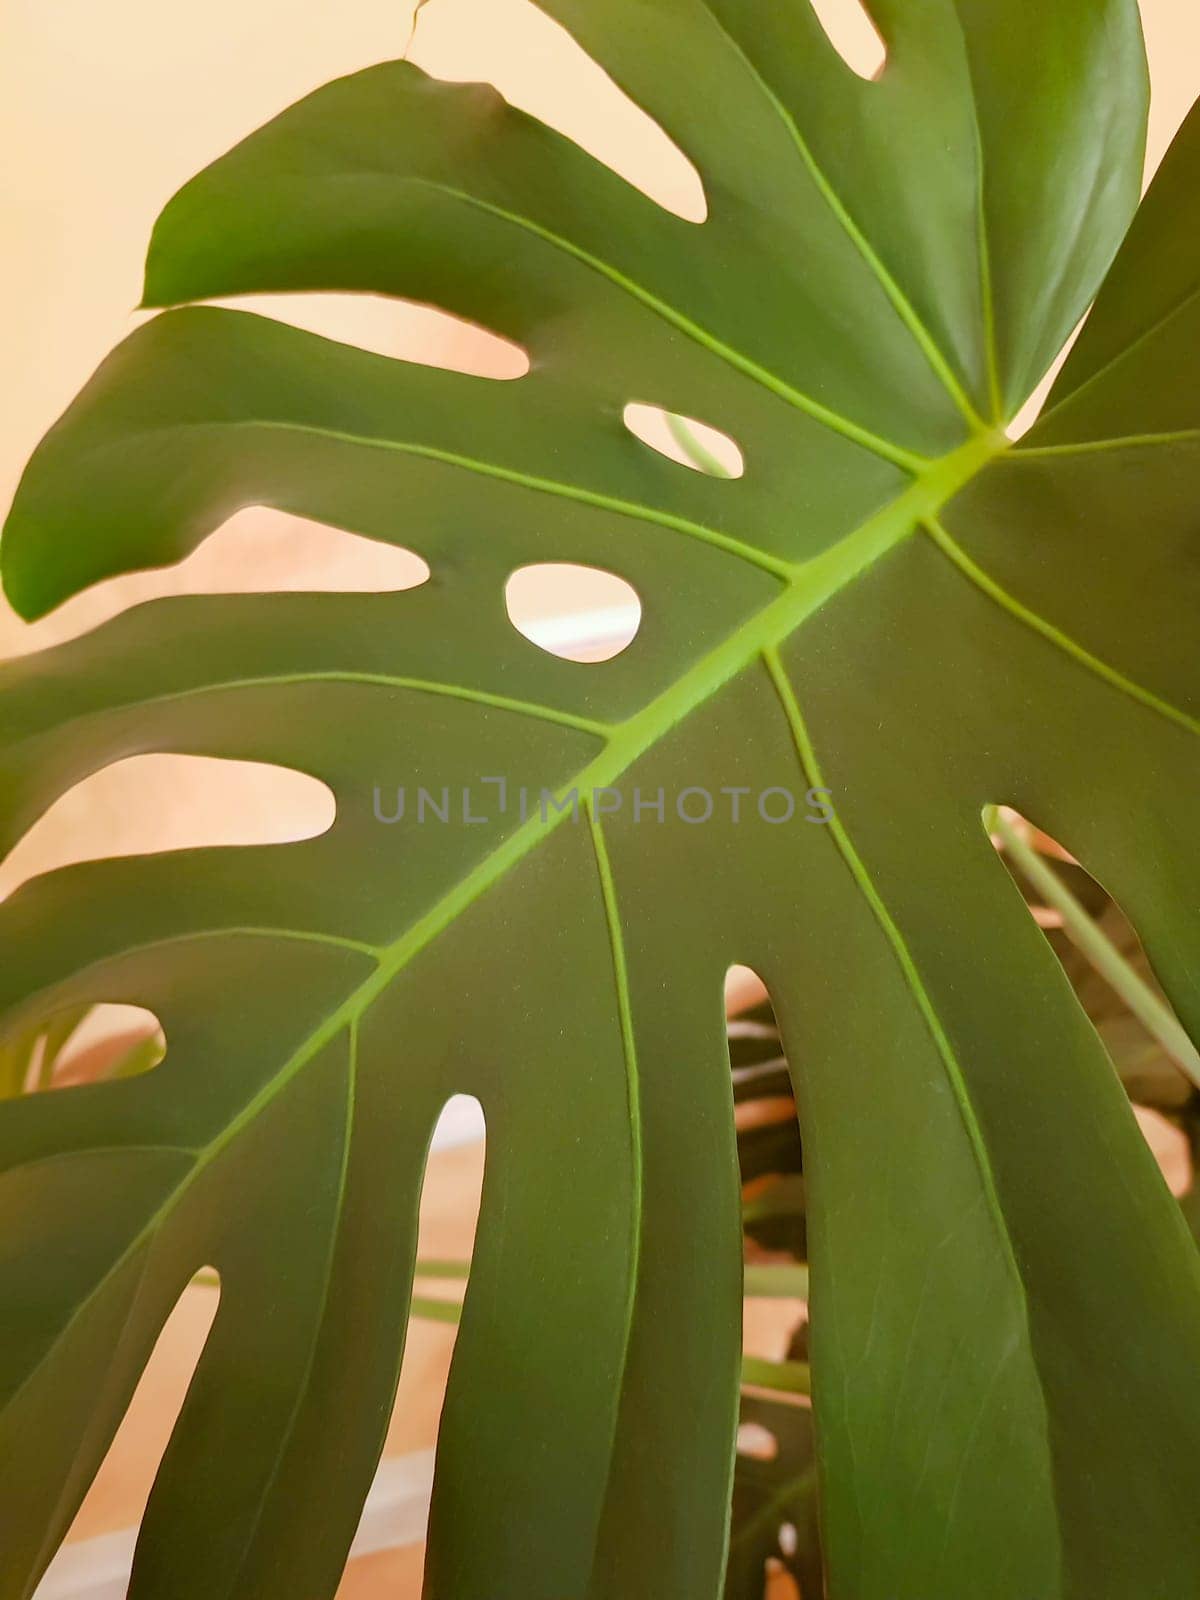 Monstera leaf close-up on a yellow background, vertical.